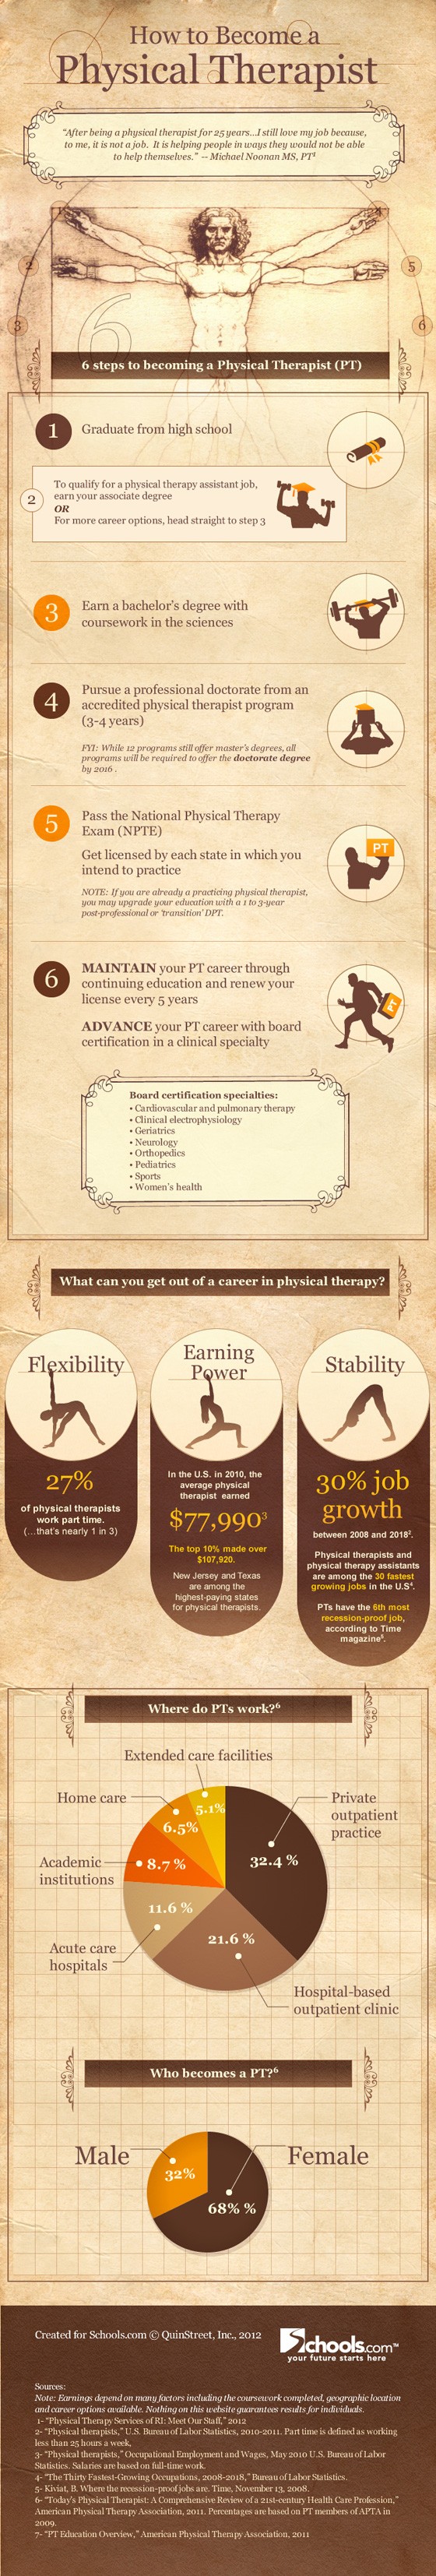 become physical therapist